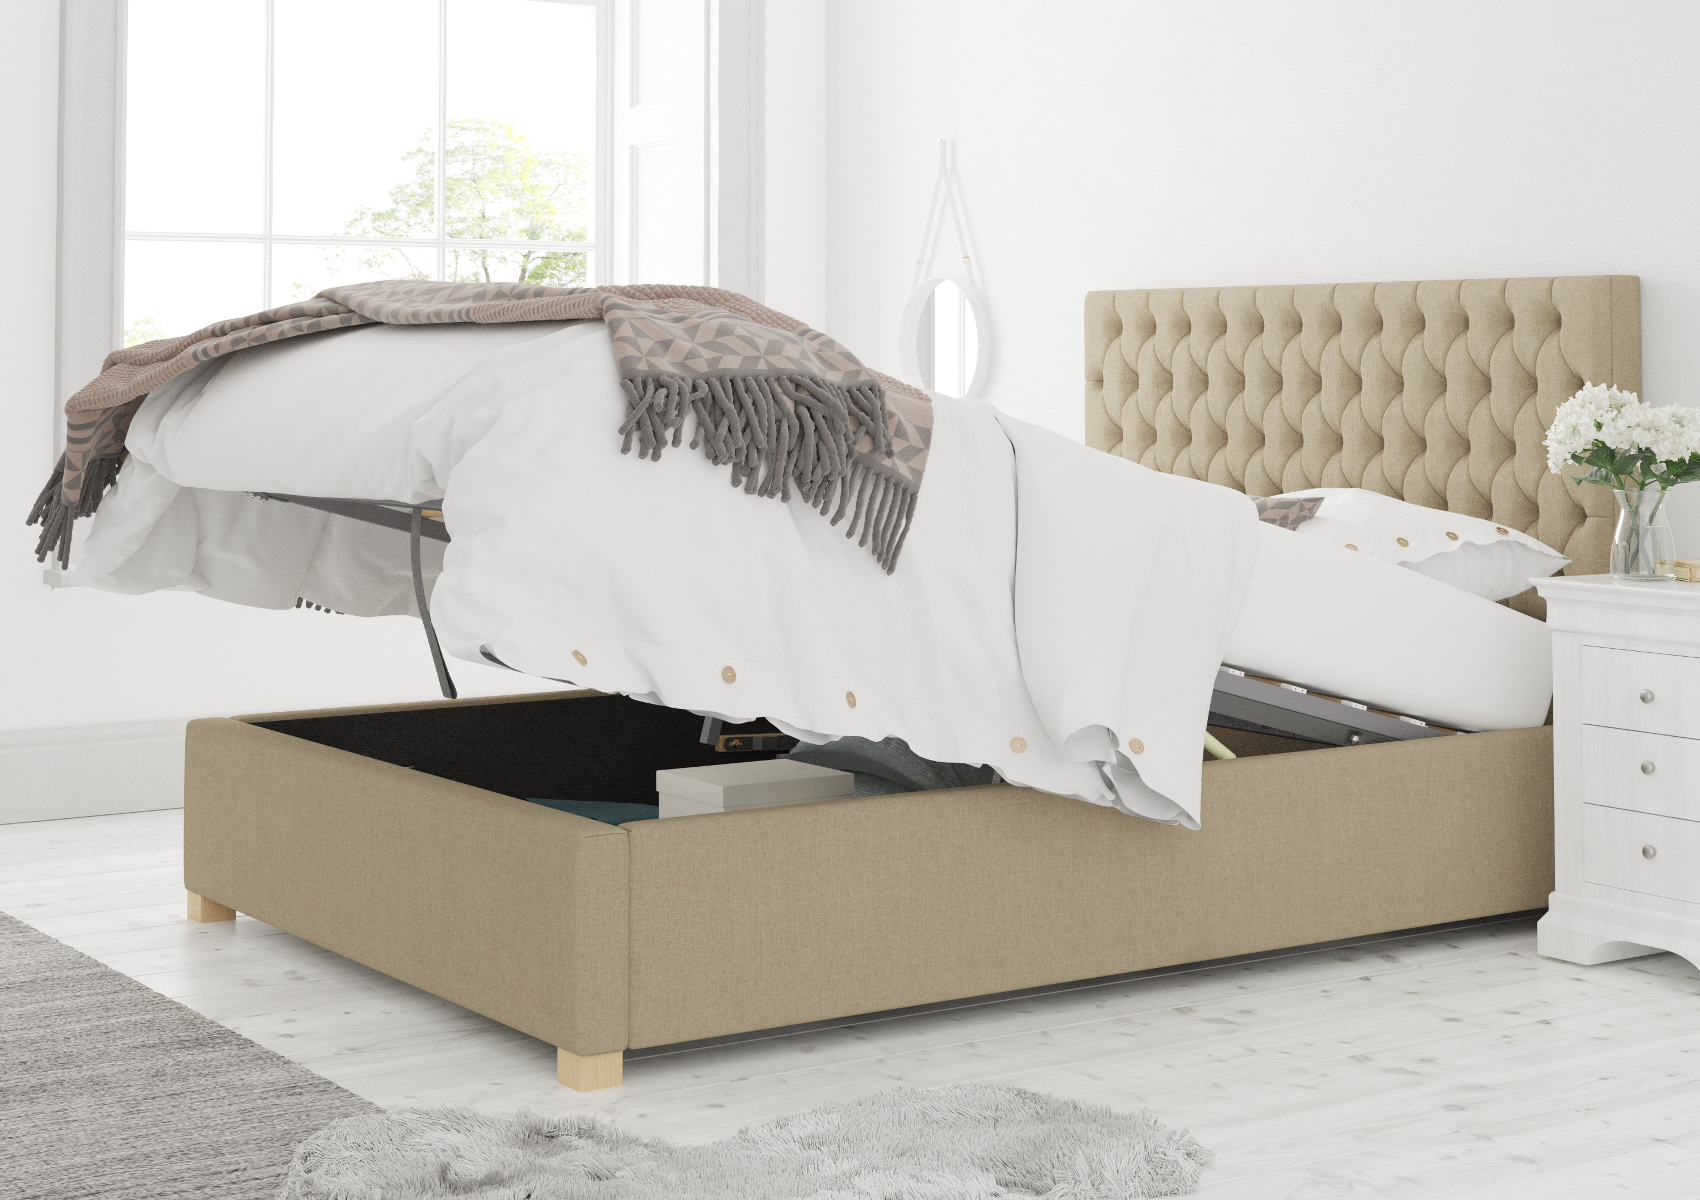 View Malton Natural Upholstered Double Ottoman Bed Time4Sleep information